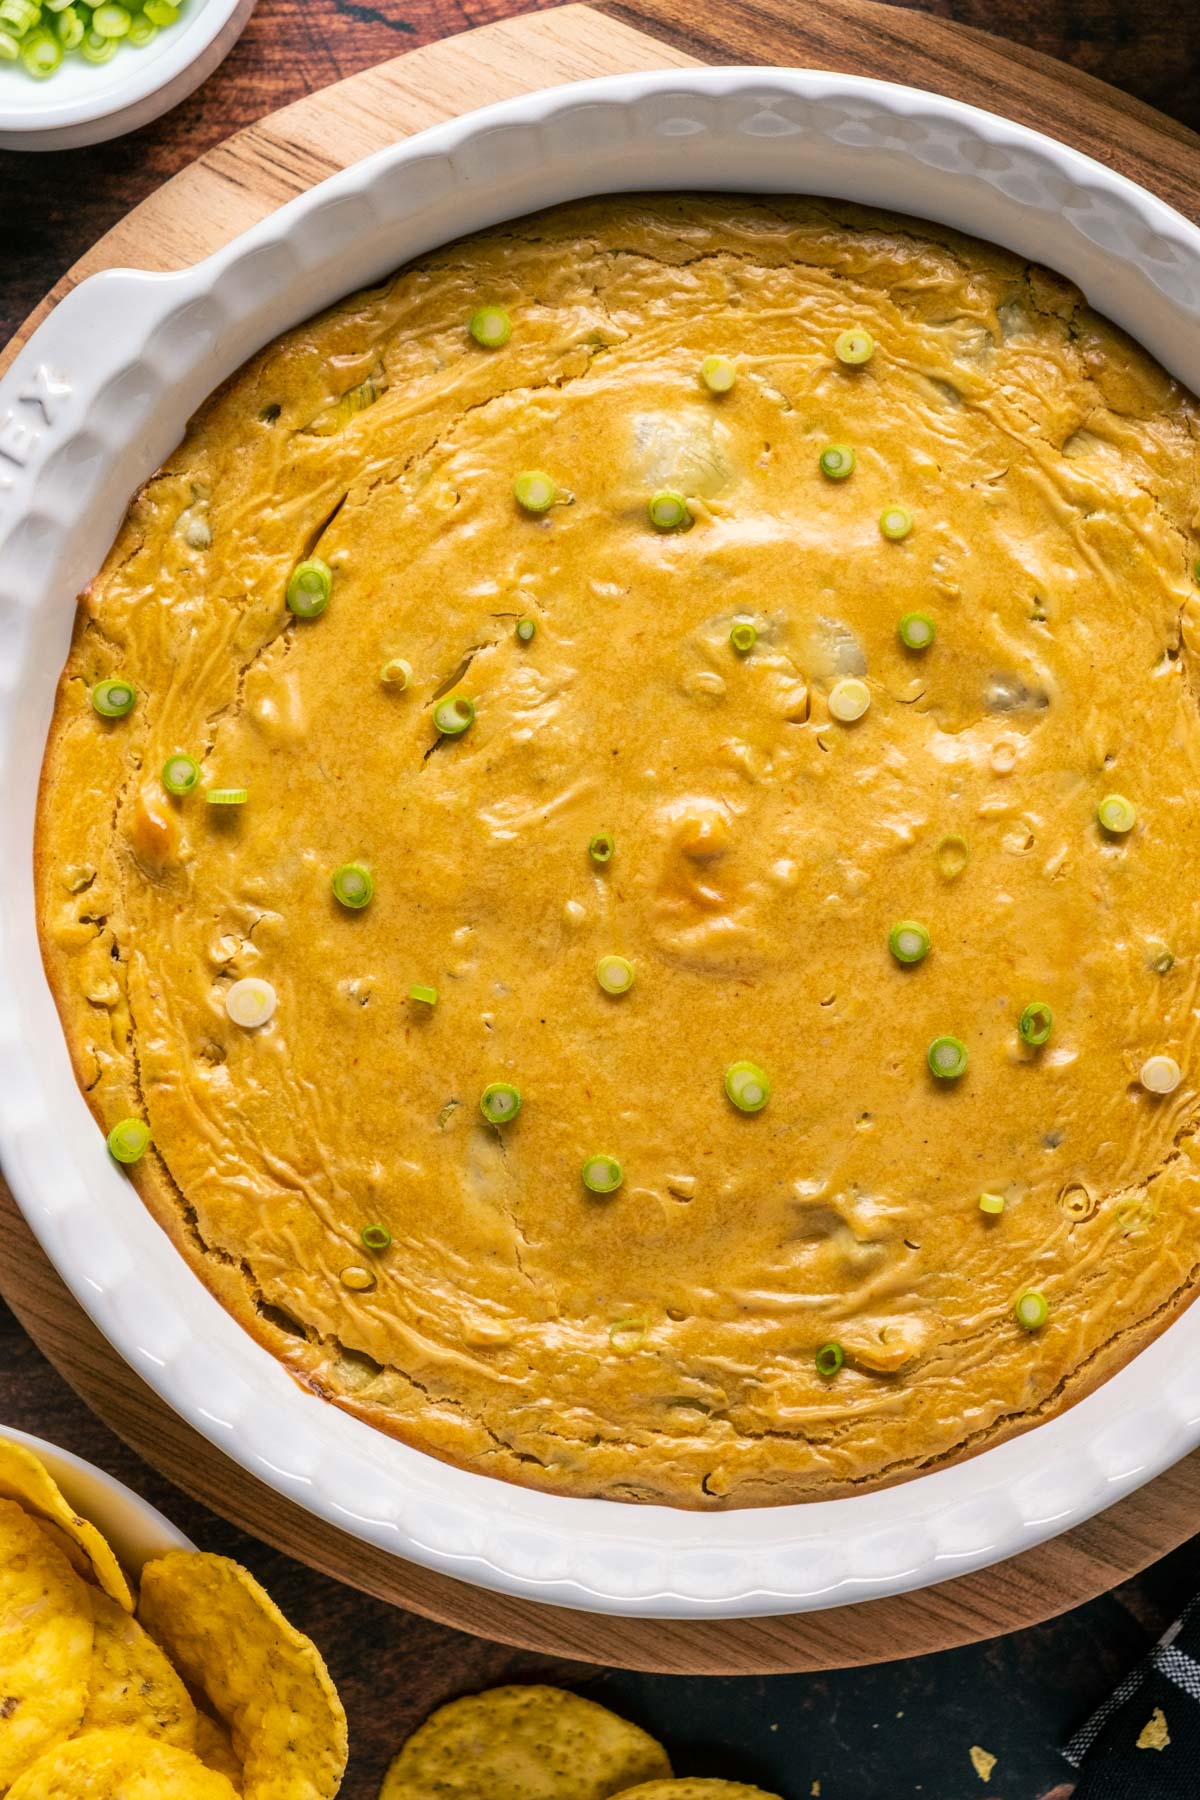 Vegan buffalo chicken dip topped with chopped green onions in a white dish.